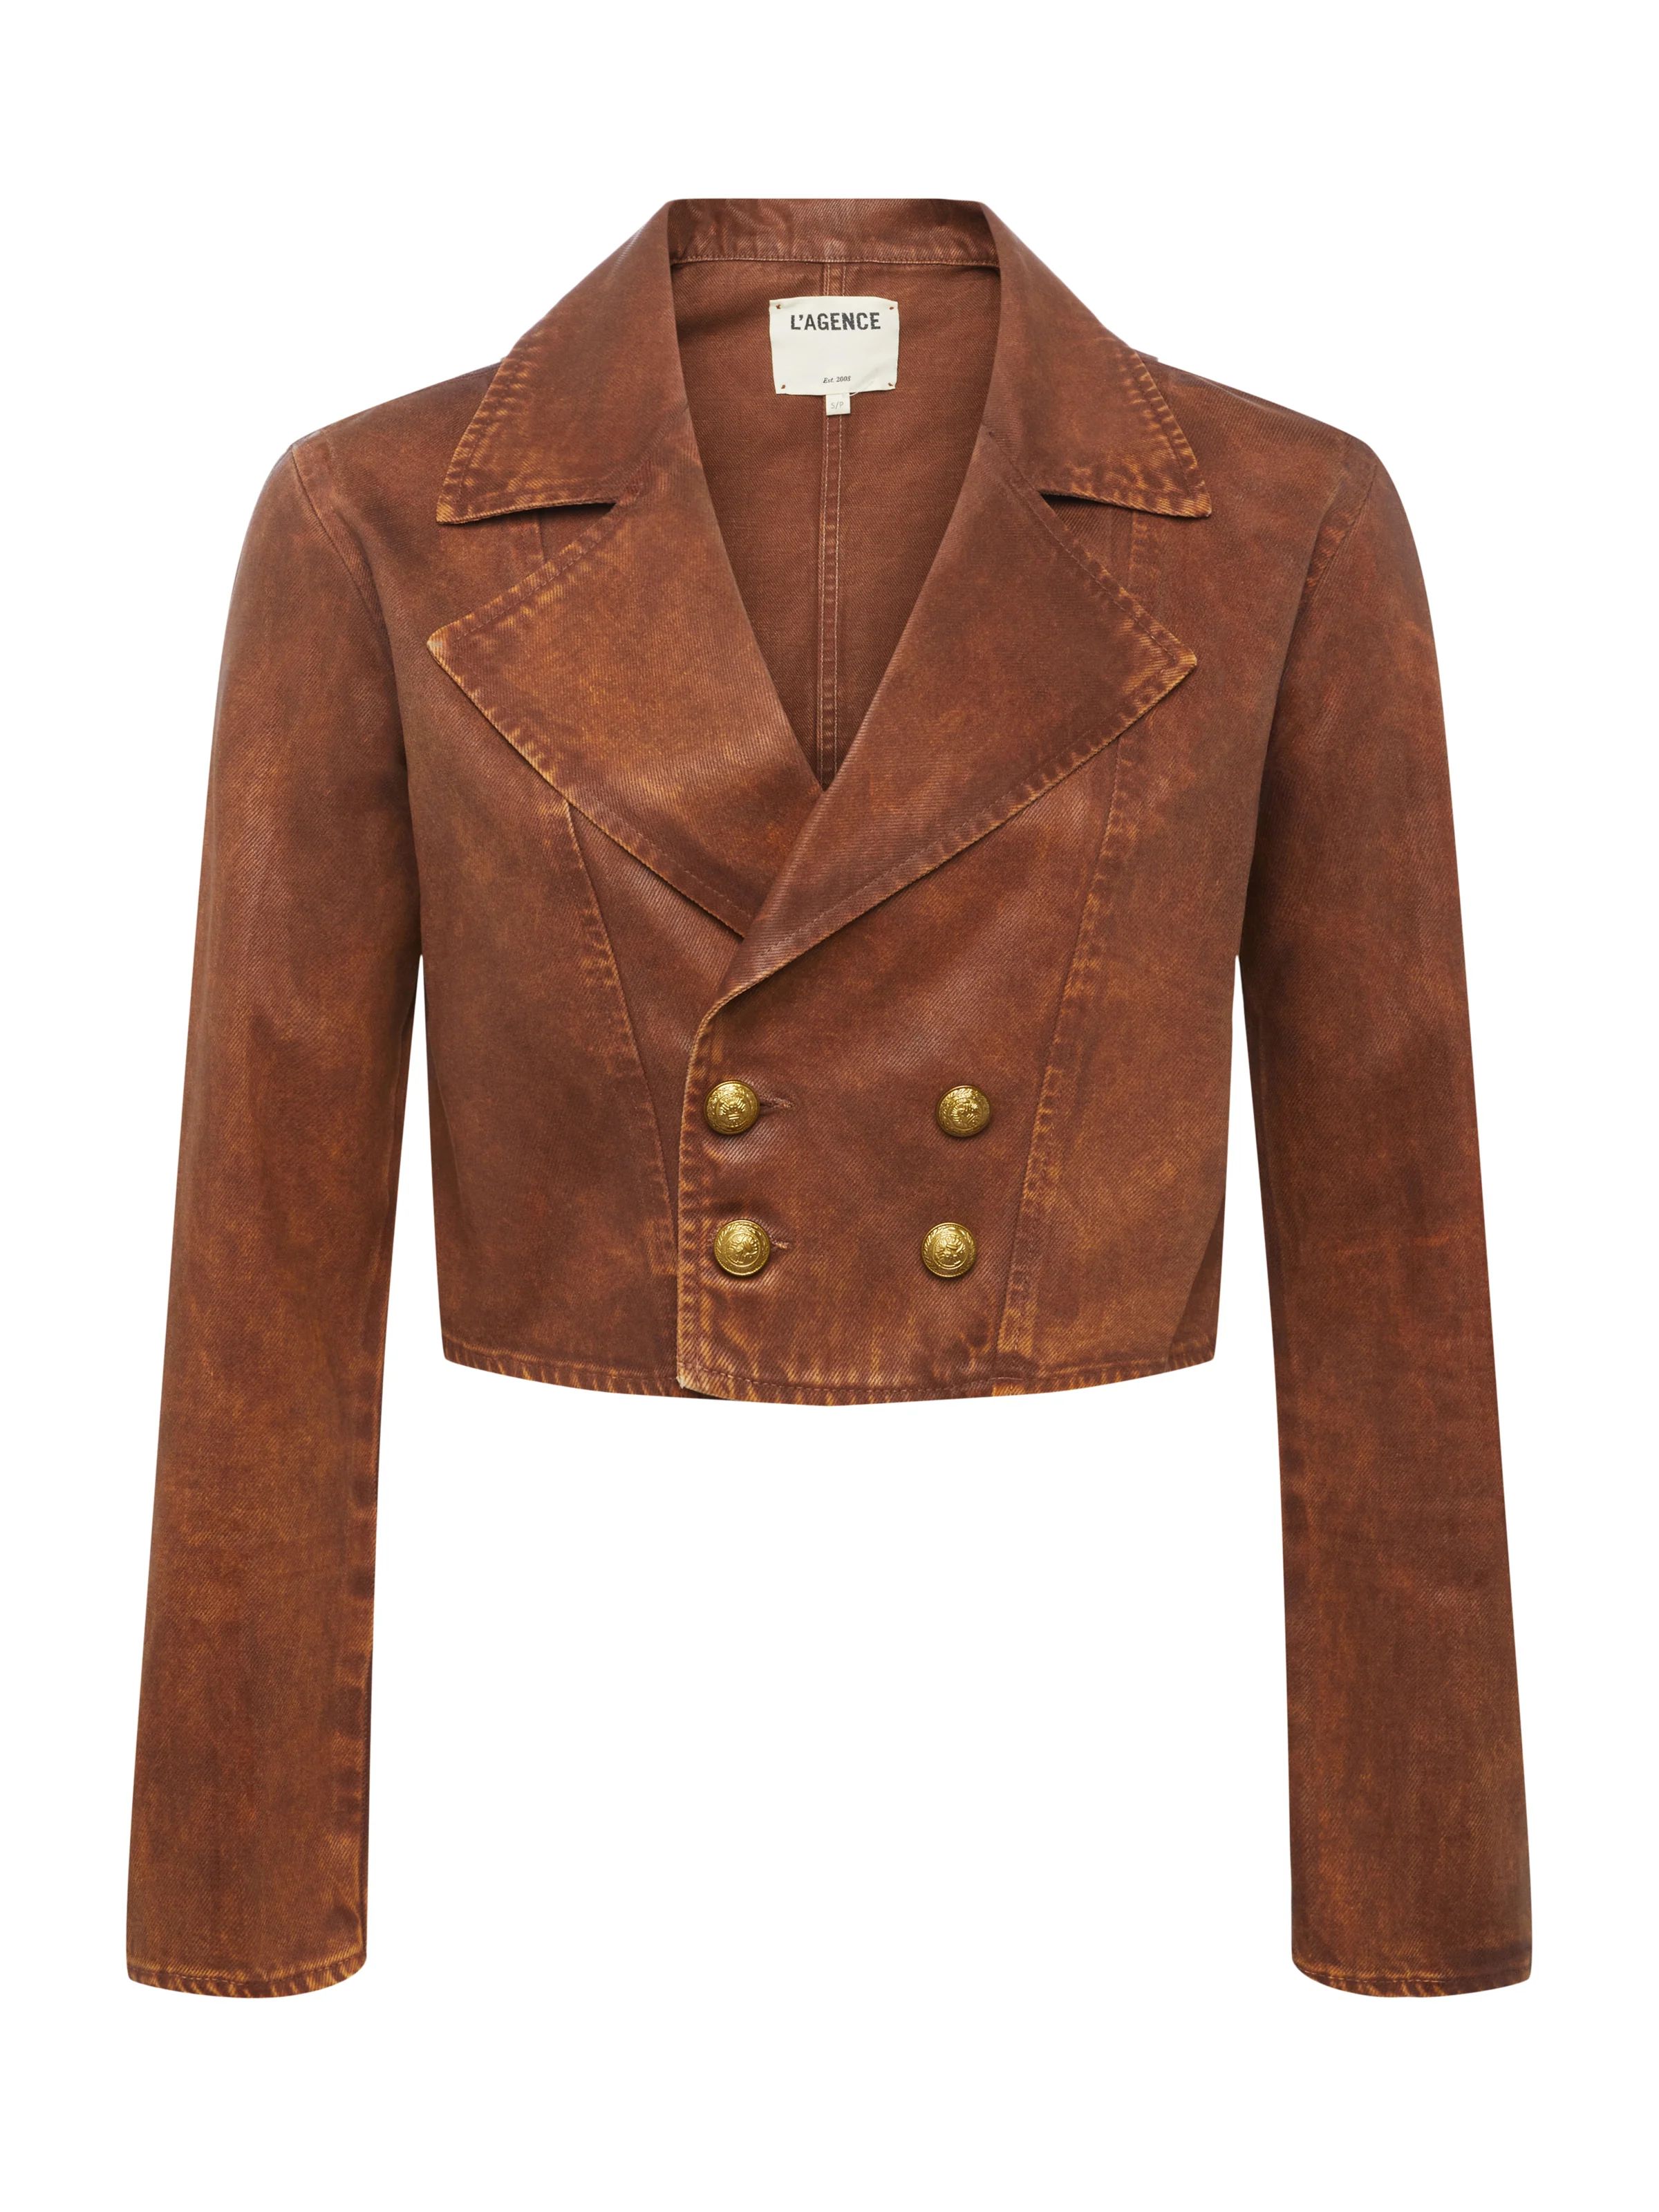 L'AGENCE Laverne Coated Jacket In Henna Mineral Coated | L'Agence